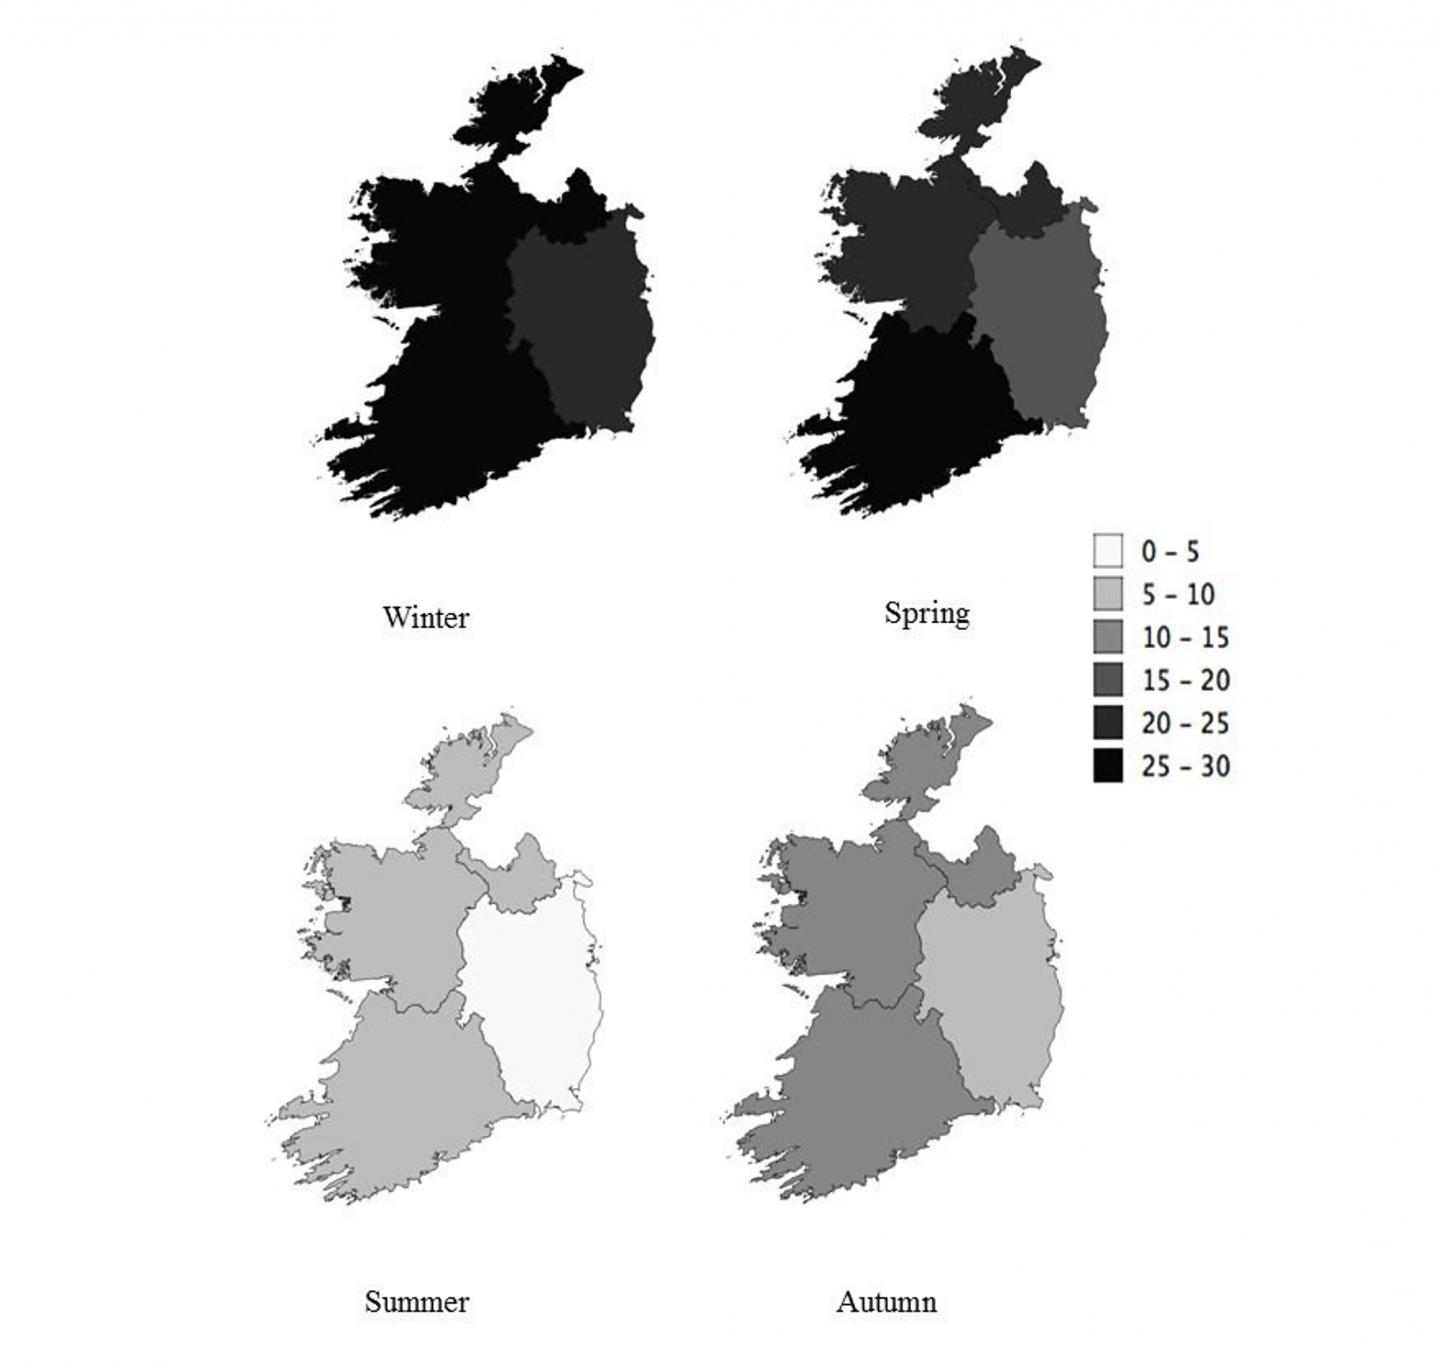 Vitamin D Deficiency Tates in Ireland by Season and Location